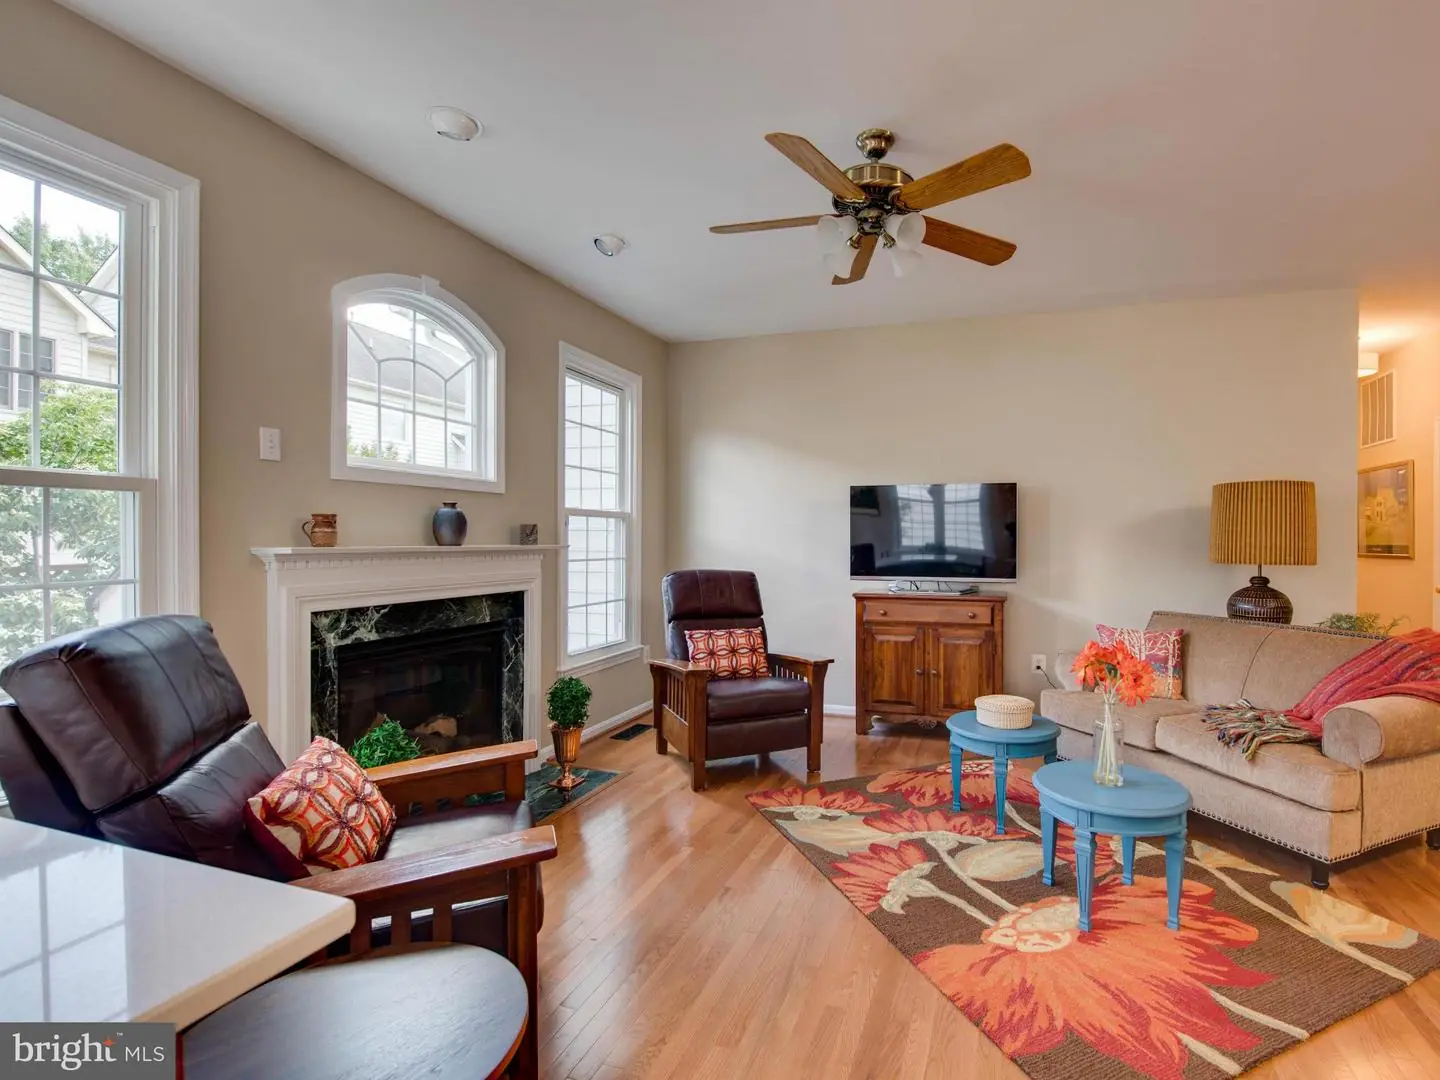 1002166507-121242701466-2021-09-05-22-36-58  |  Windy Hill At Lincolnia | Alexandria Delaware Real Estate For Sale | MLS# 1002166507  - Best of Northern Virginia